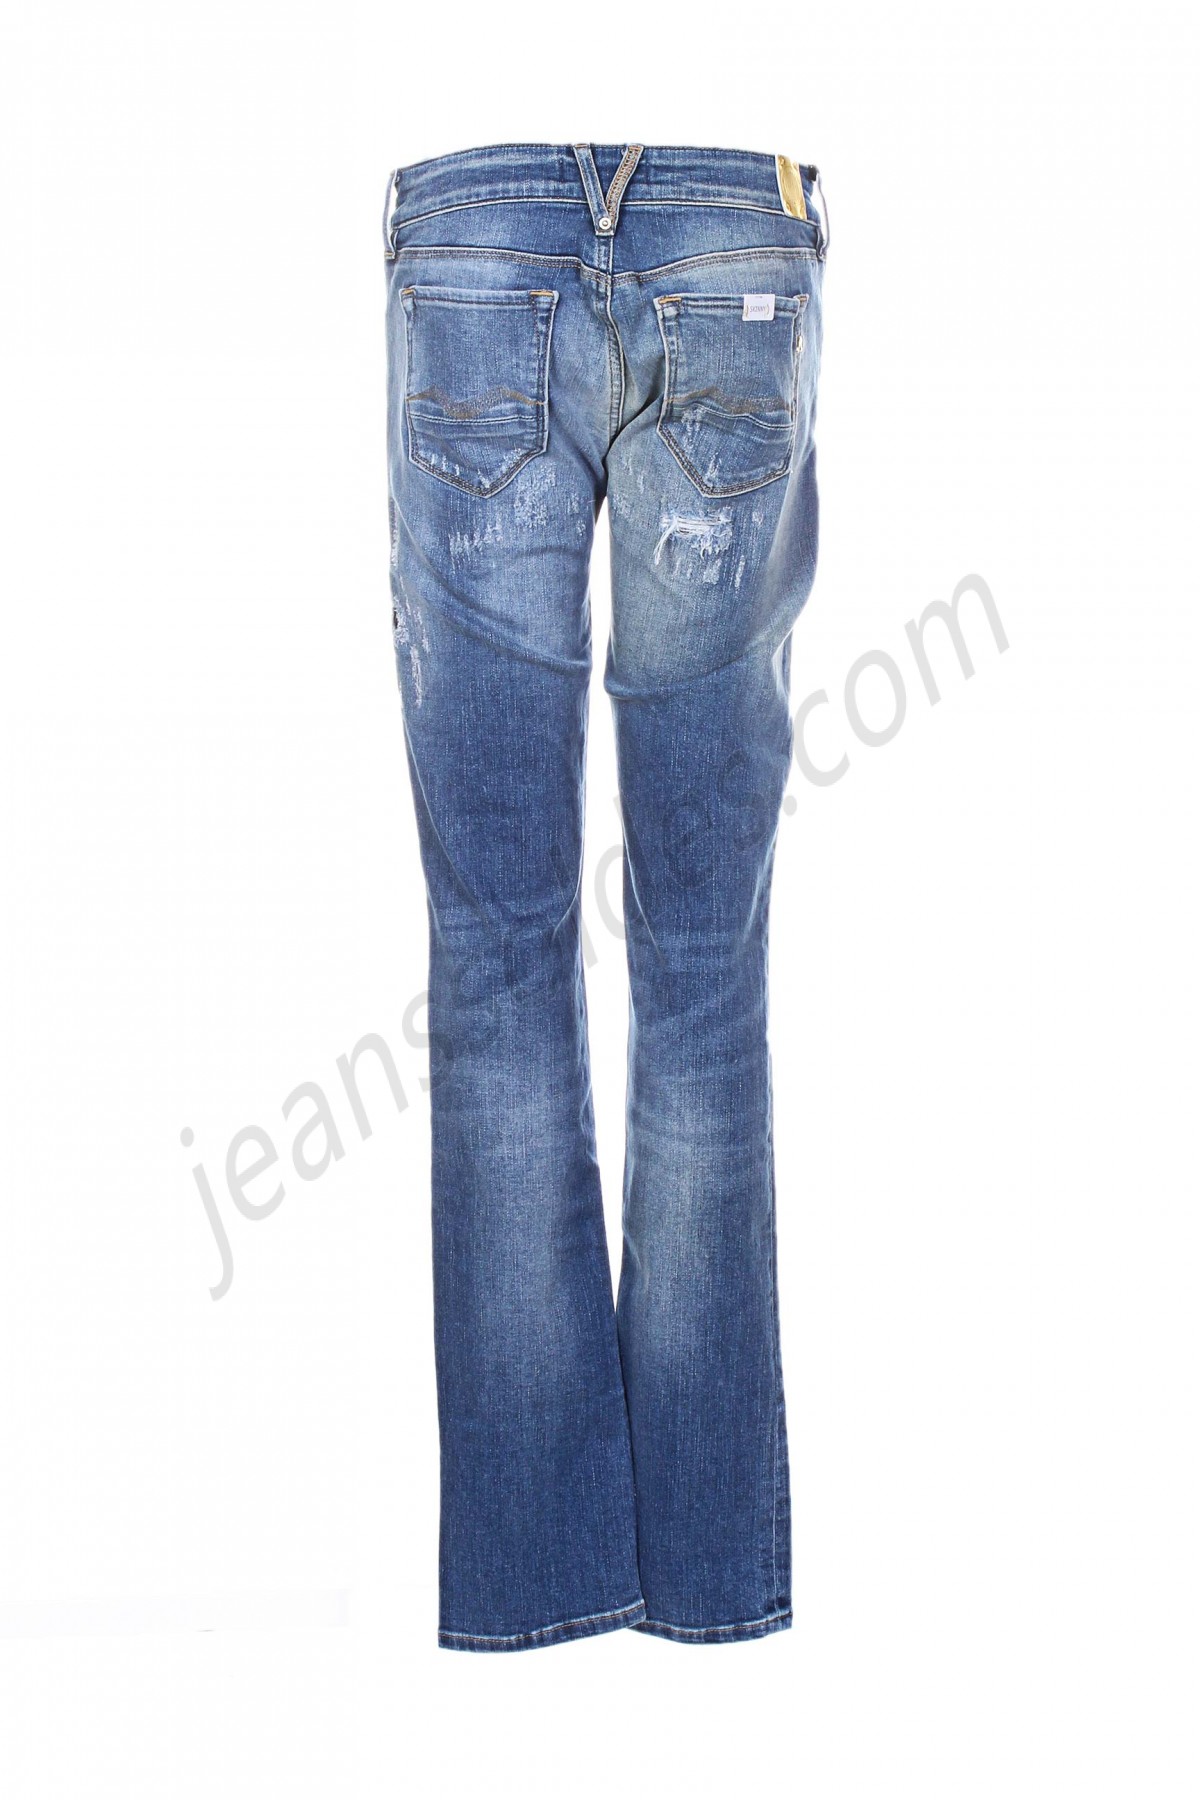 replay-Jeans coupe slim prix d’amis - -1